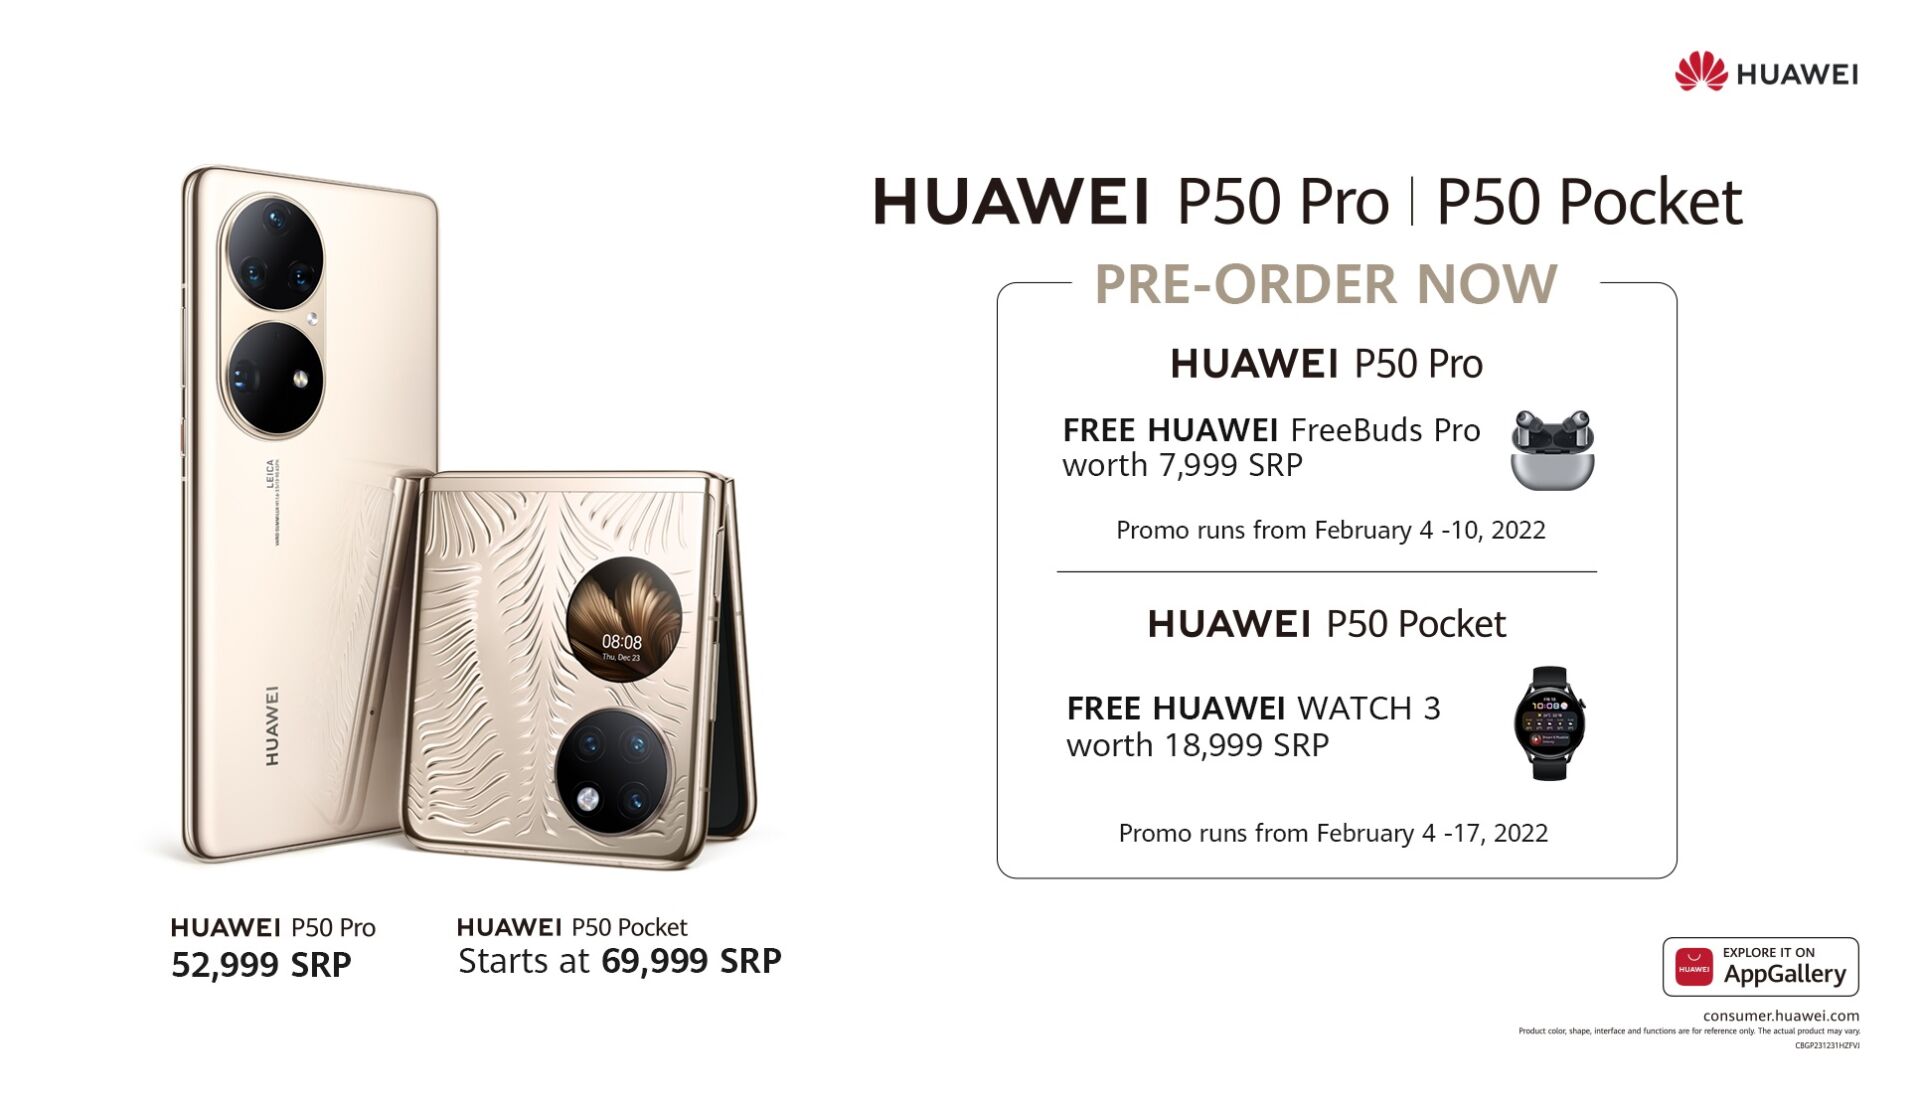 Huawei P50 Pro and P50 Pocket Launches in the Philippines - Jam Online